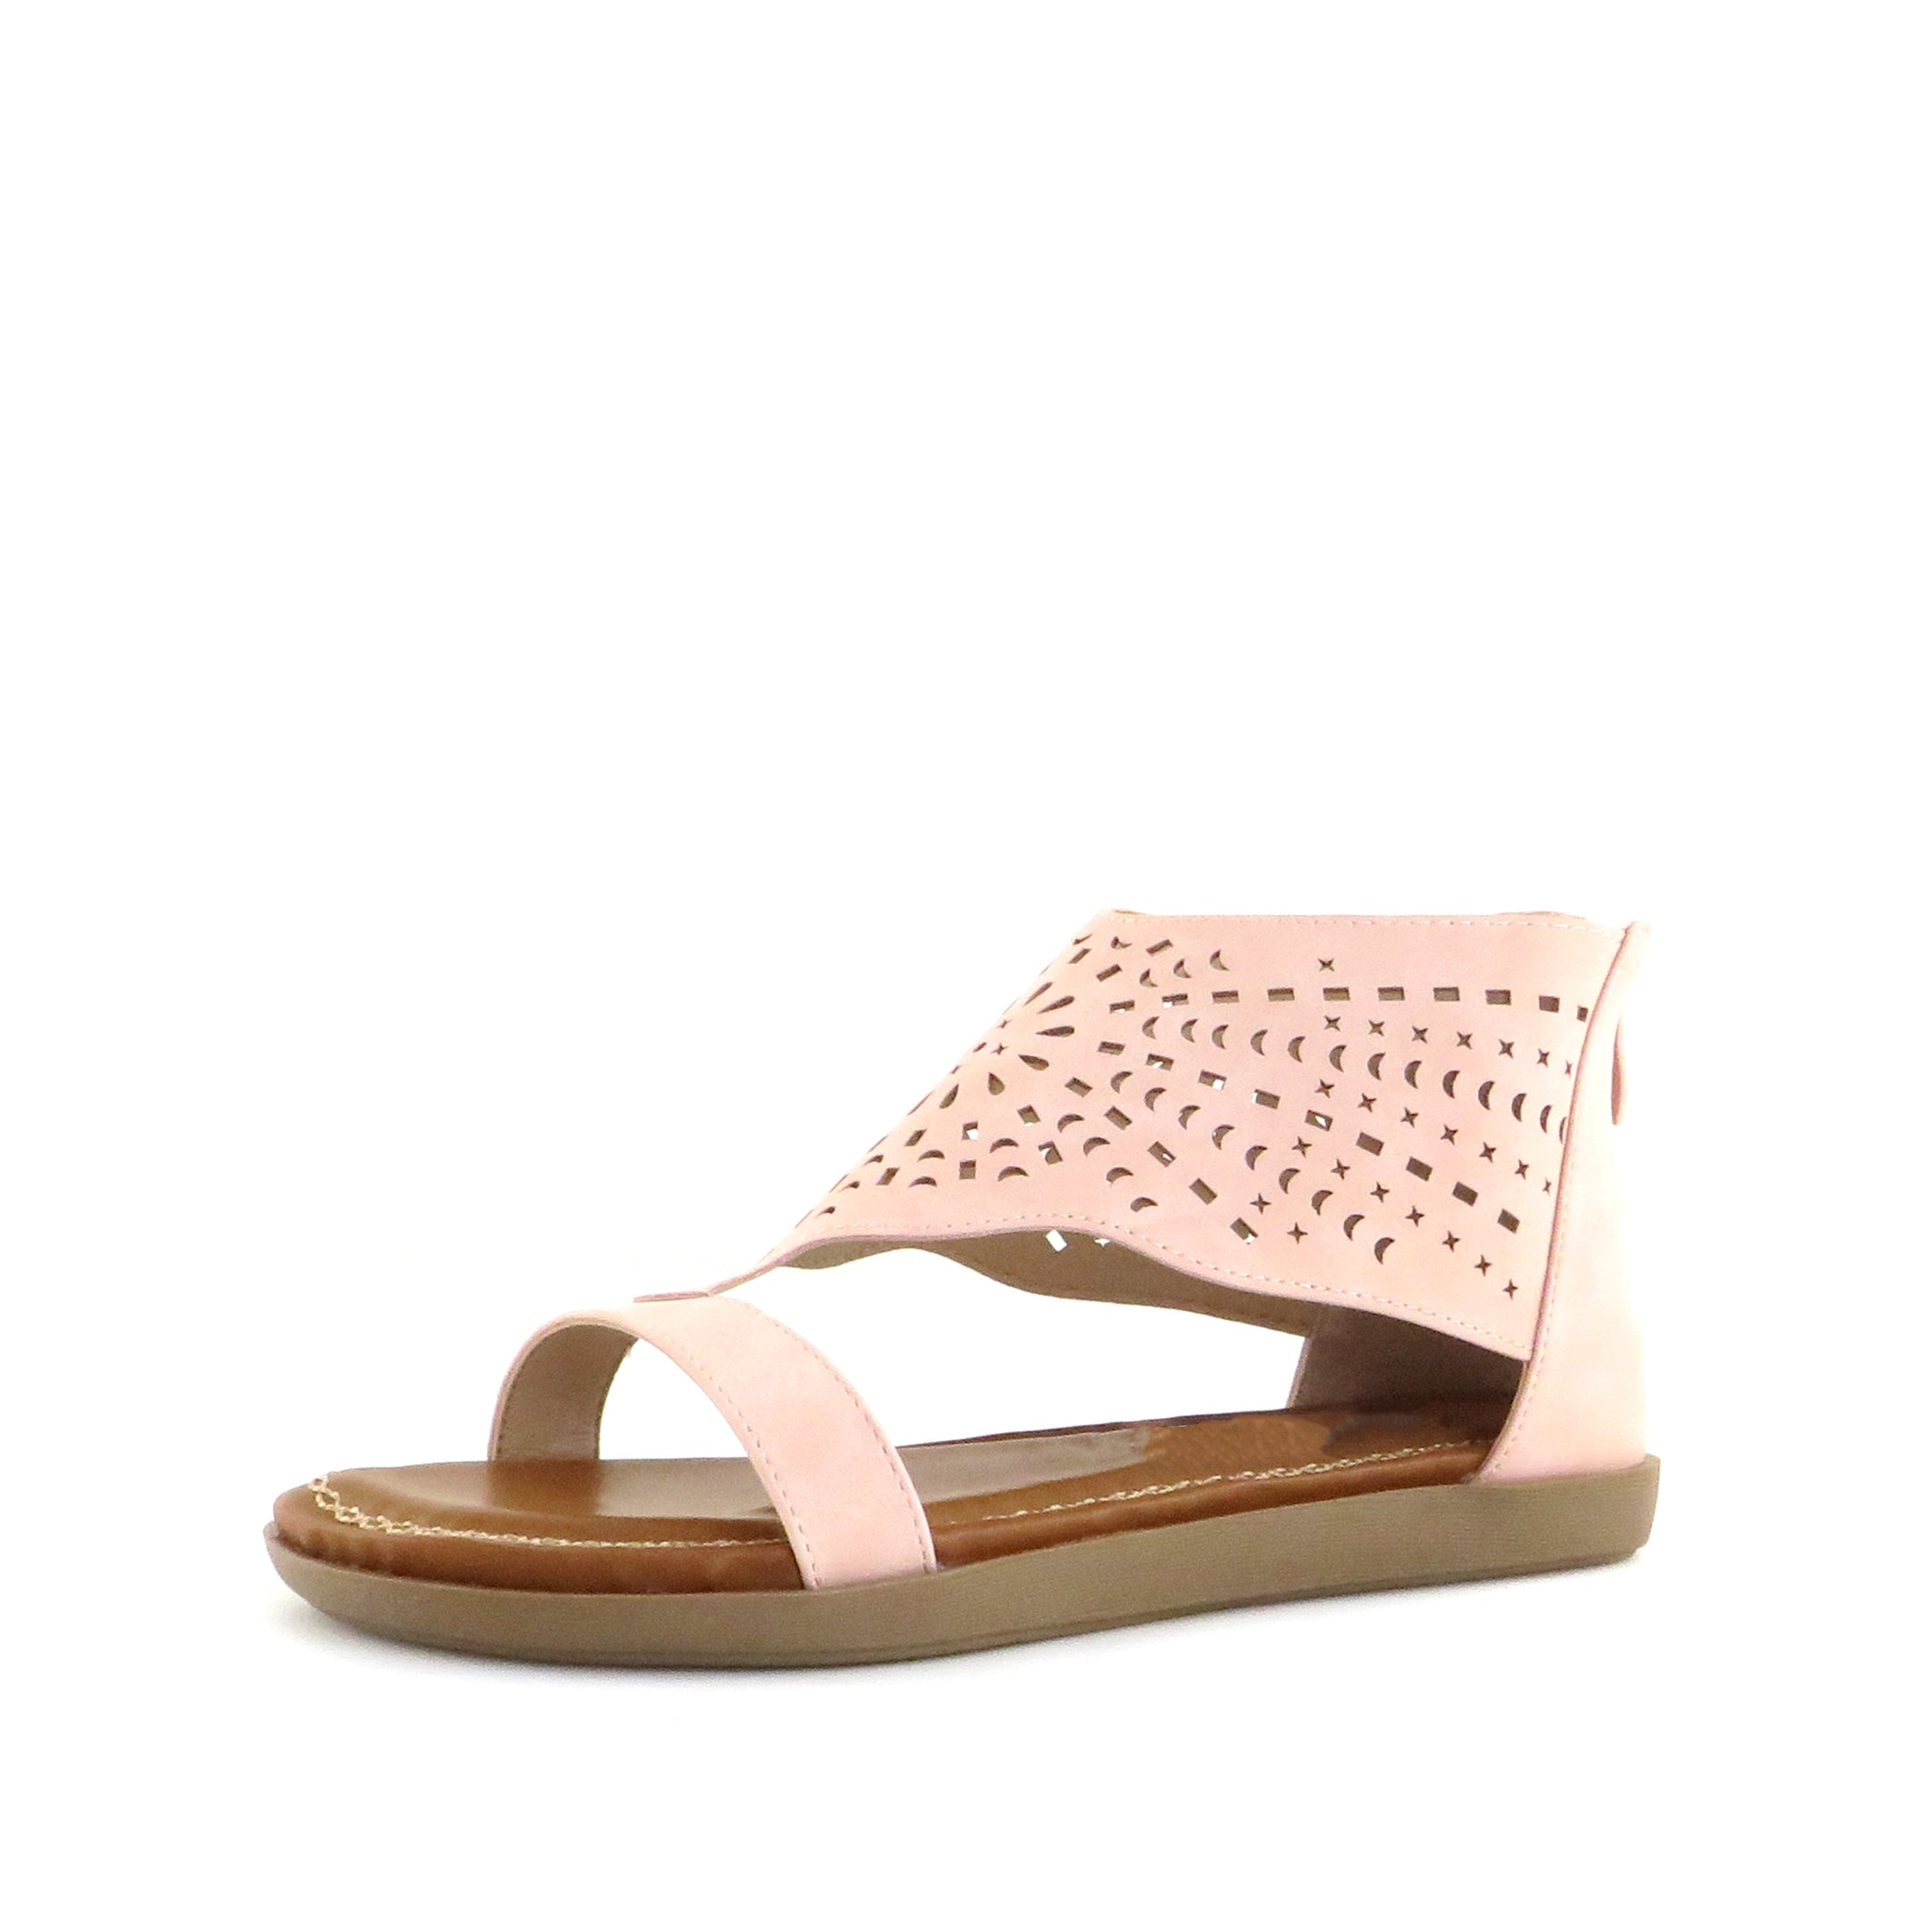 Women's Crissy Peach Perforated Sandal